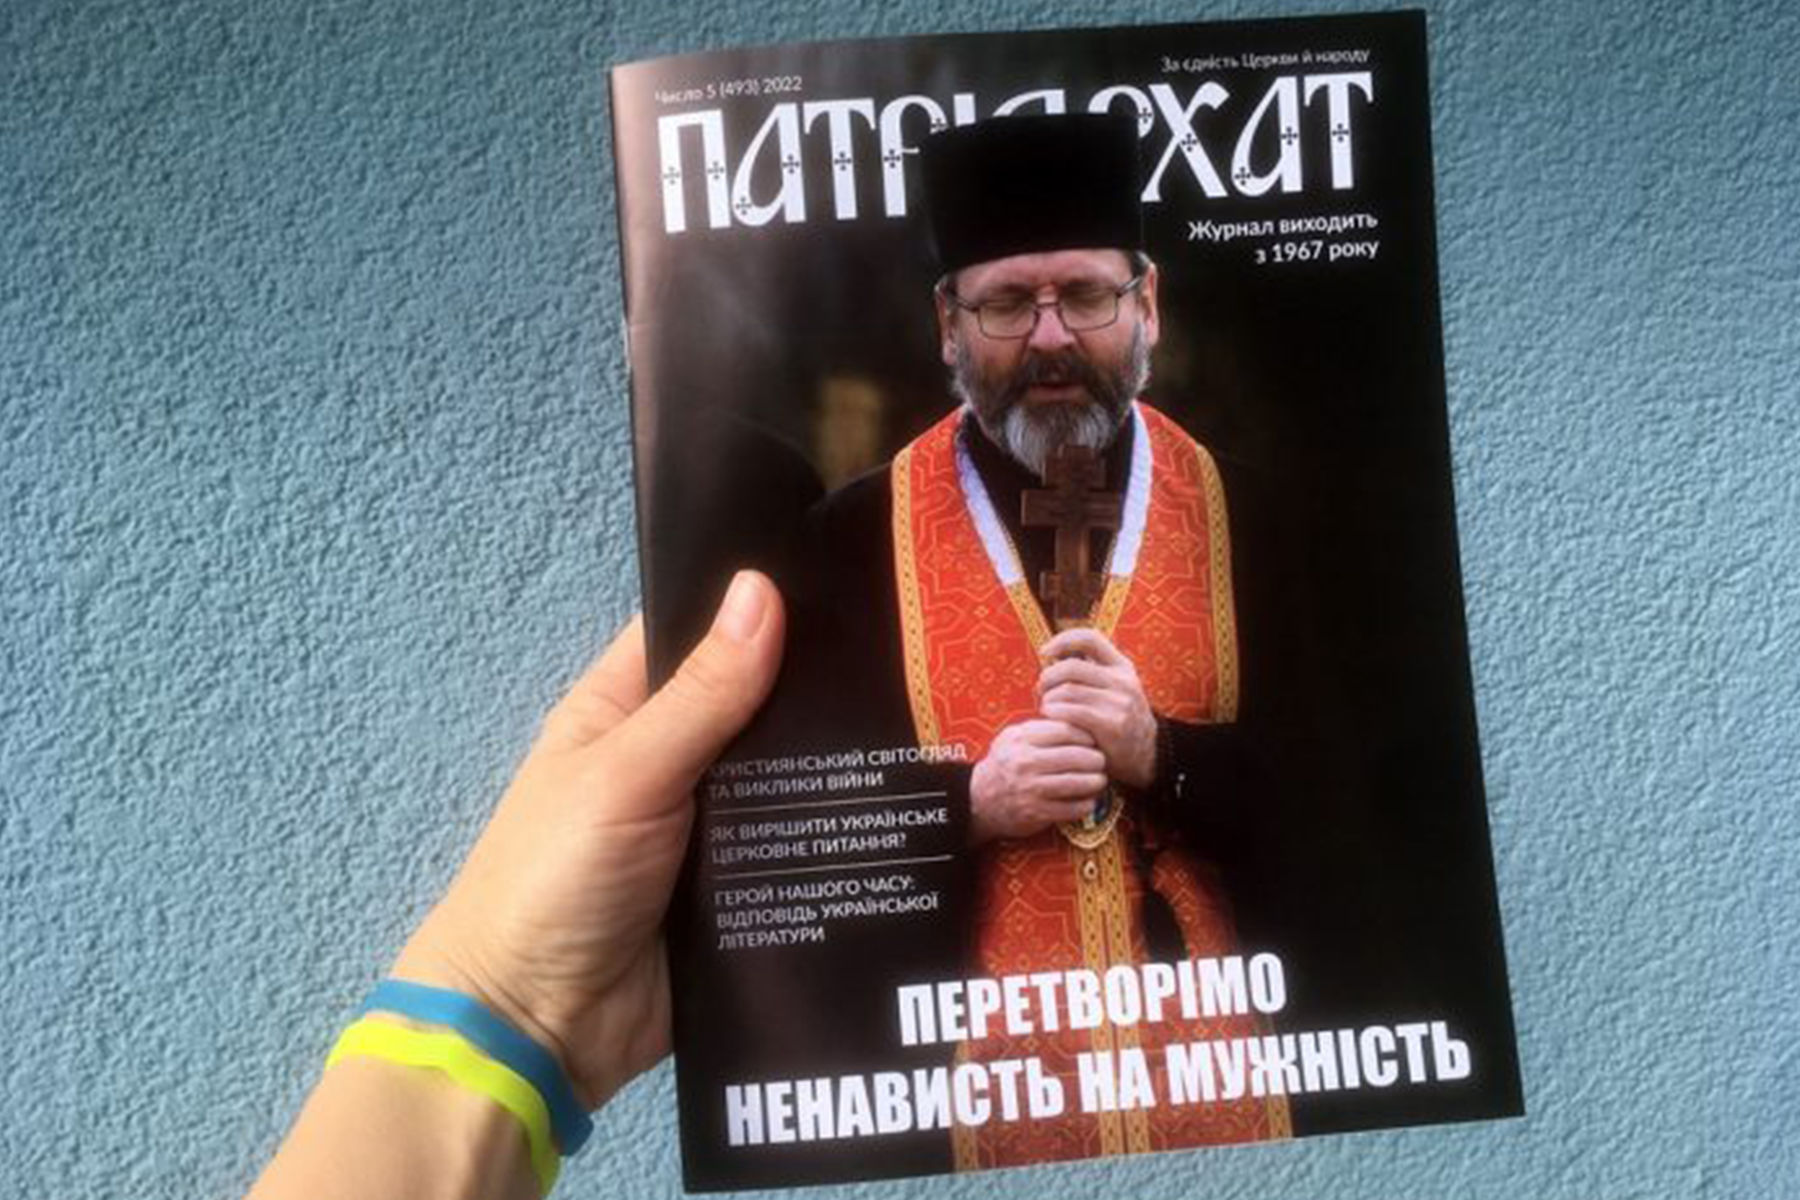  “Let us turn hatred into courage”: His Beatitude Sviatoslav in the new issue of “The Patriarchate”